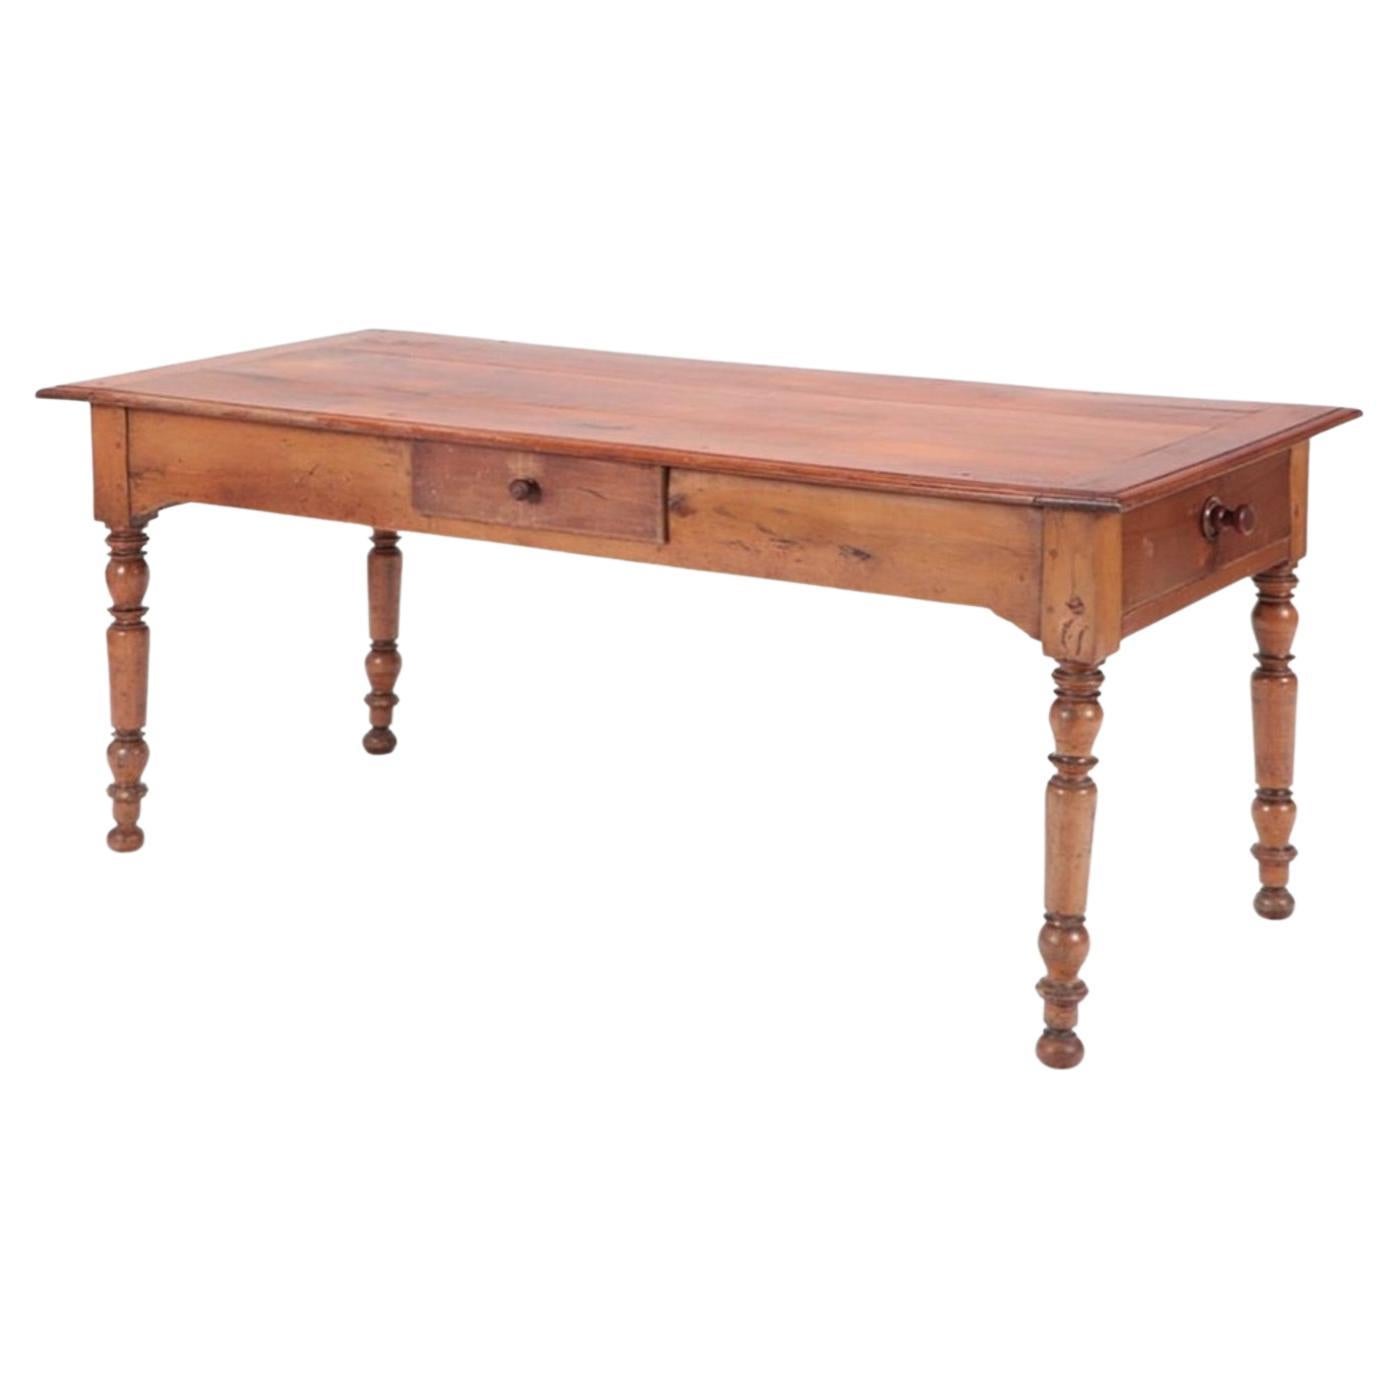 19th Century French Provincial Cherry Wood Farm Table with Turned Legs For Sale